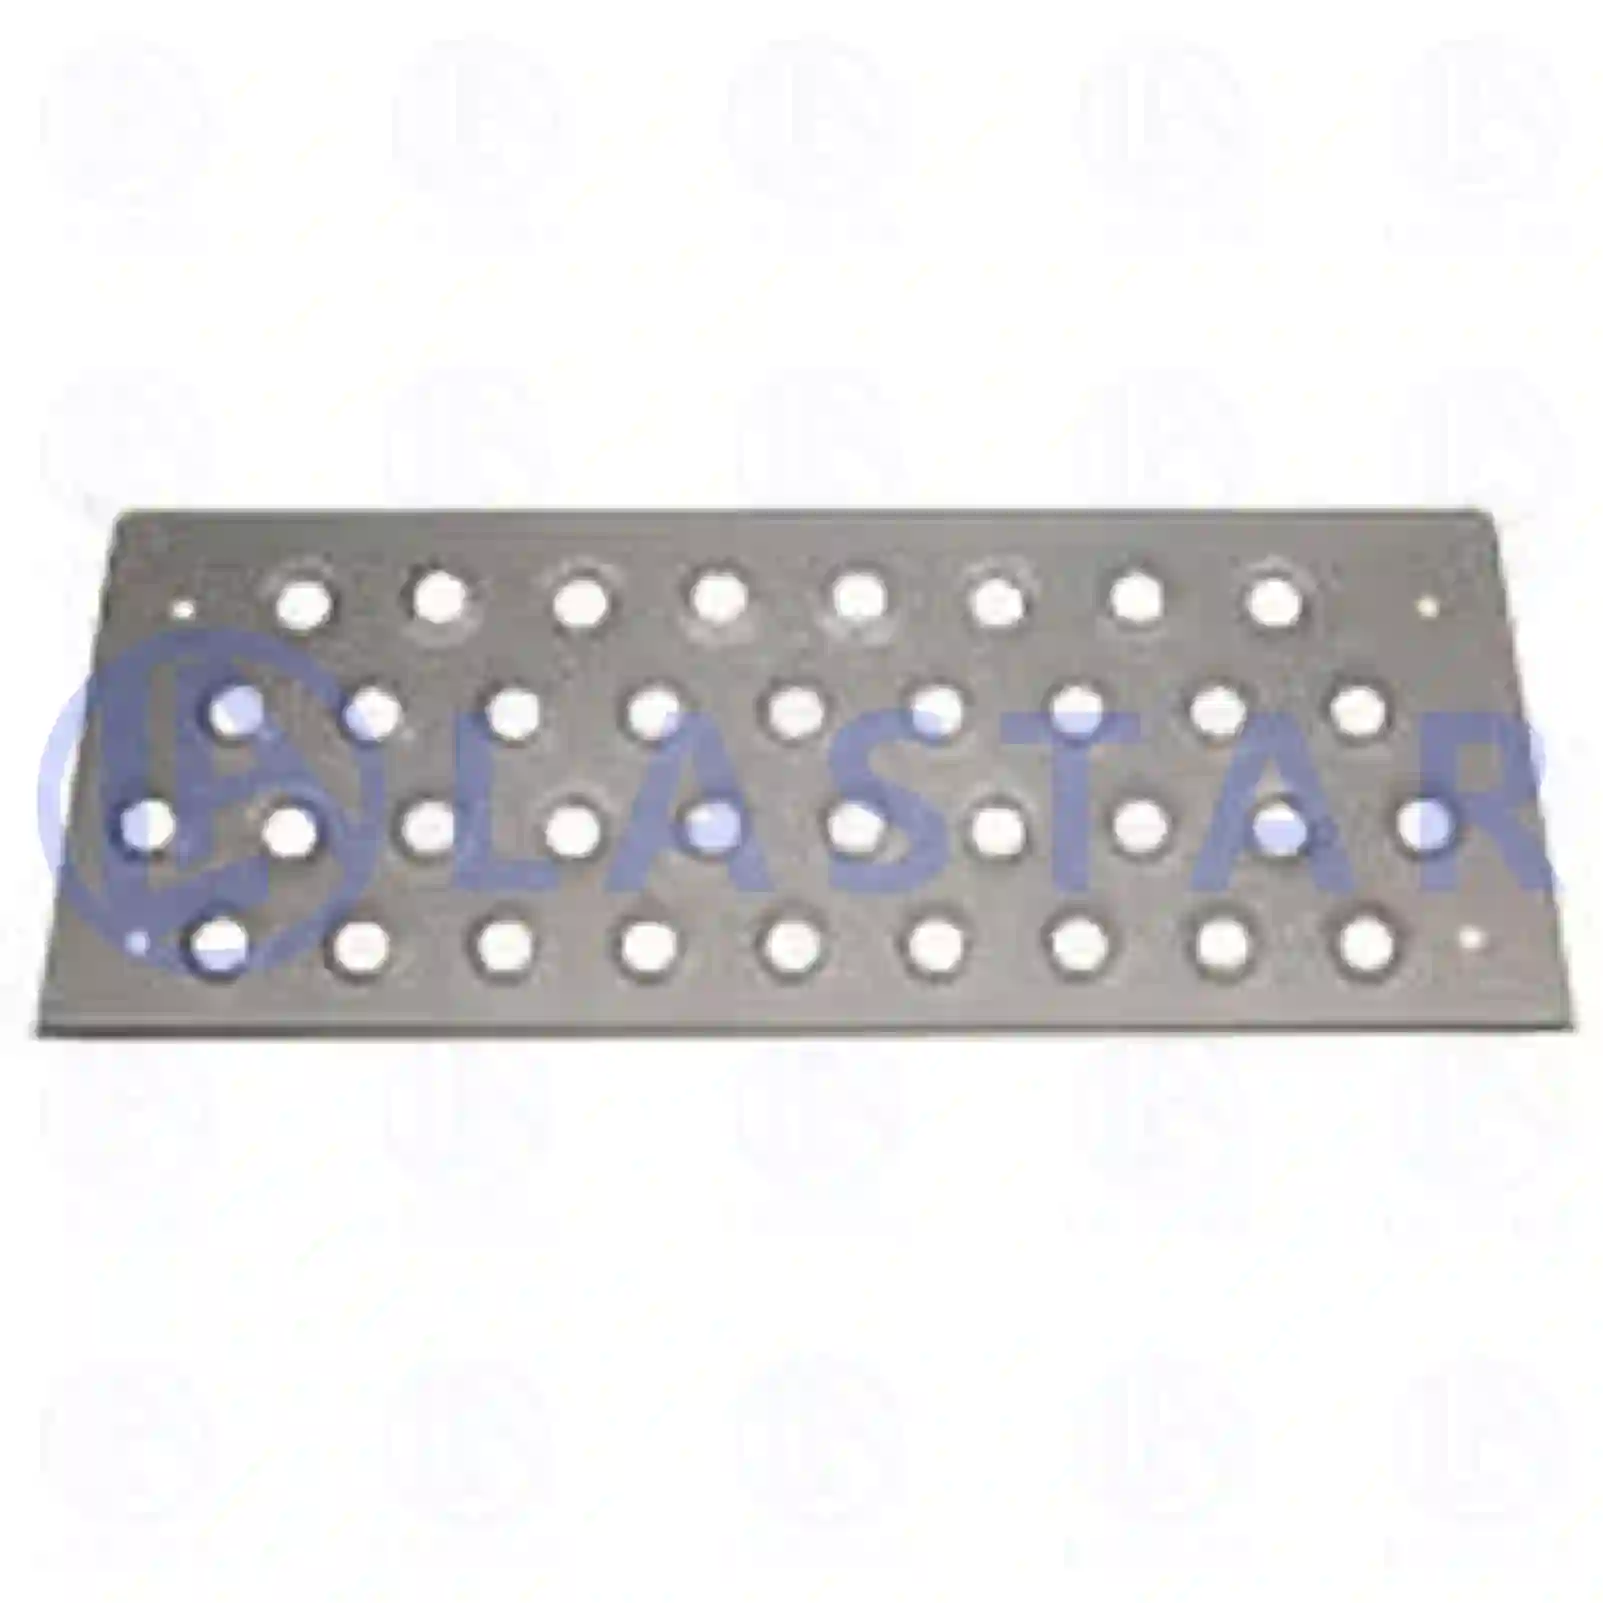 Step plate, 77718817, 4006660128, 9406660128, ZG61174-0008 ||  77718817 Lastar Spare Part | Truck Spare Parts, Auotomotive Spare Parts Step plate, 77718817, 4006660128, 9406660128, ZG61174-0008 ||  77718817 Lastar Spare Part | Truck Spare Parts, Auotomotive Spare Parts